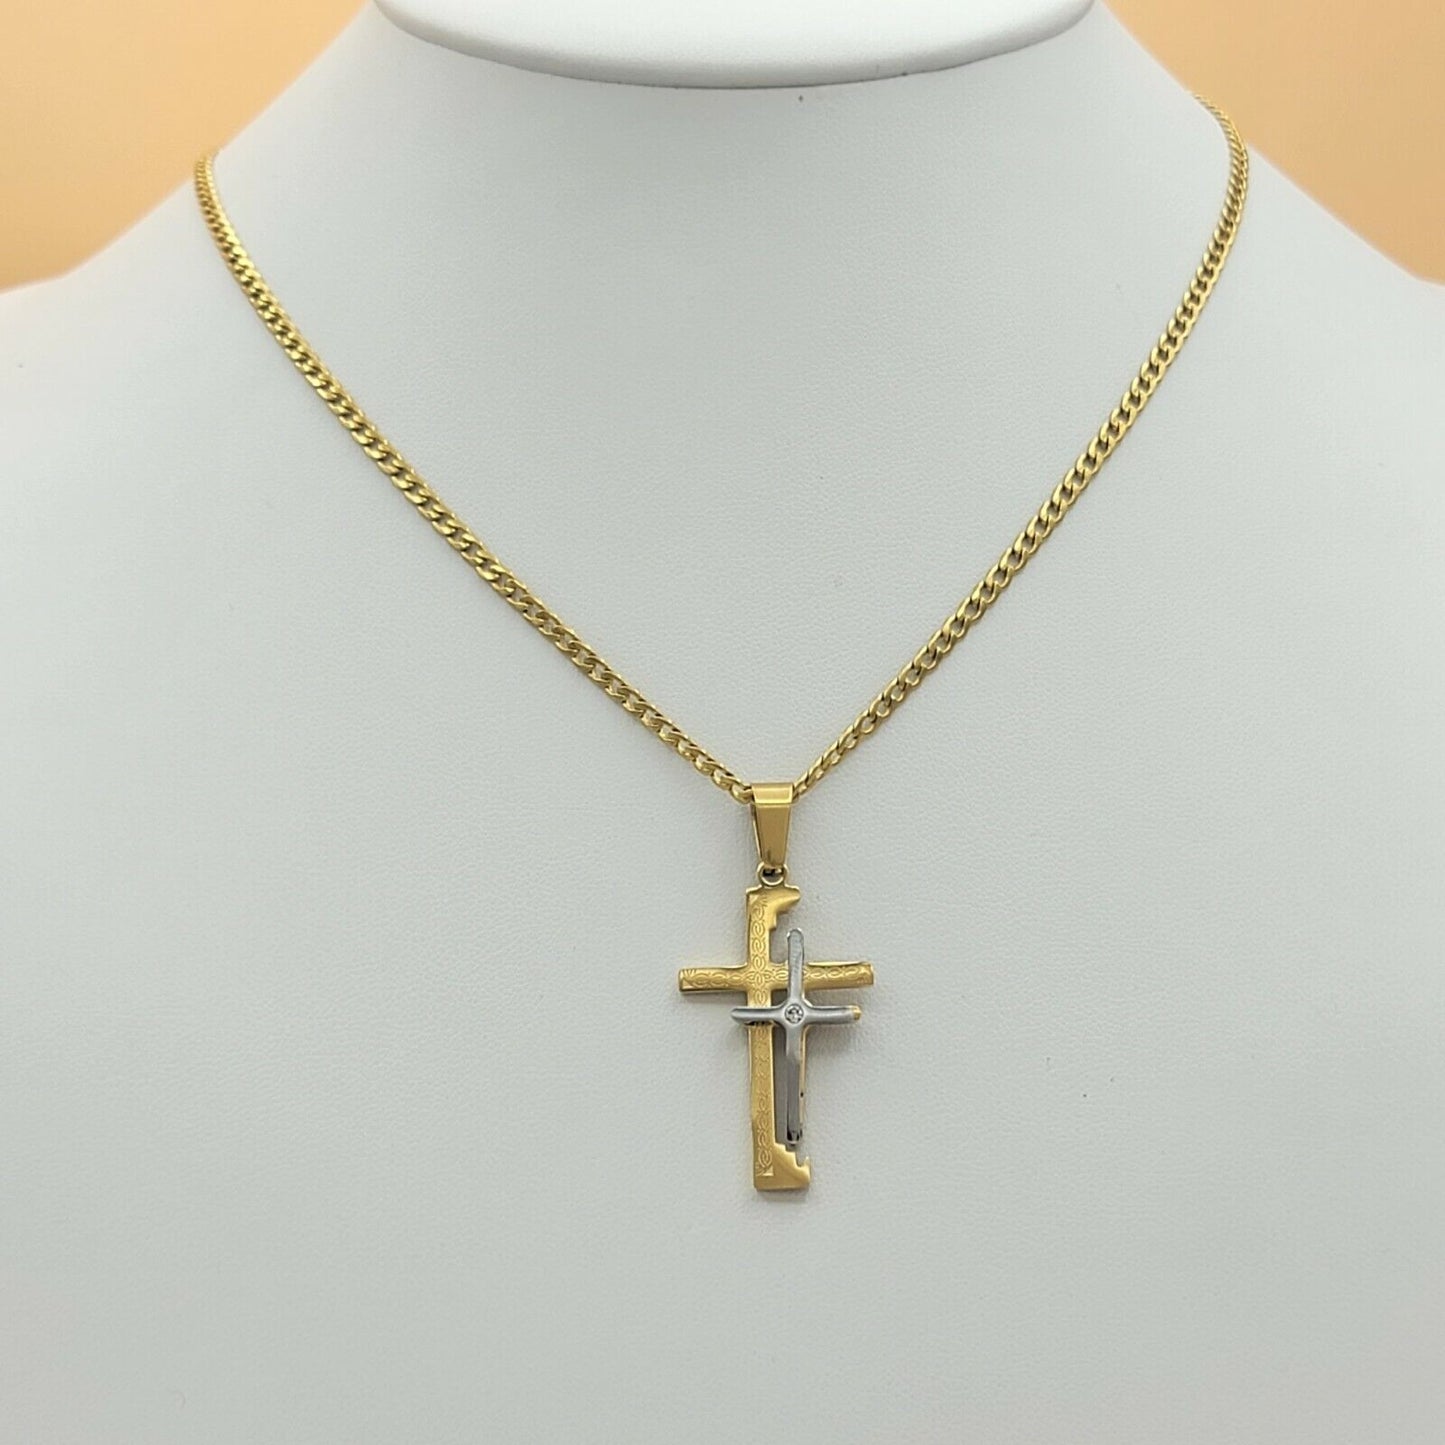 Necklaces - Stainless Steel Gold Plated. Cross Pendant & Chain. Double Cross Silver Gold